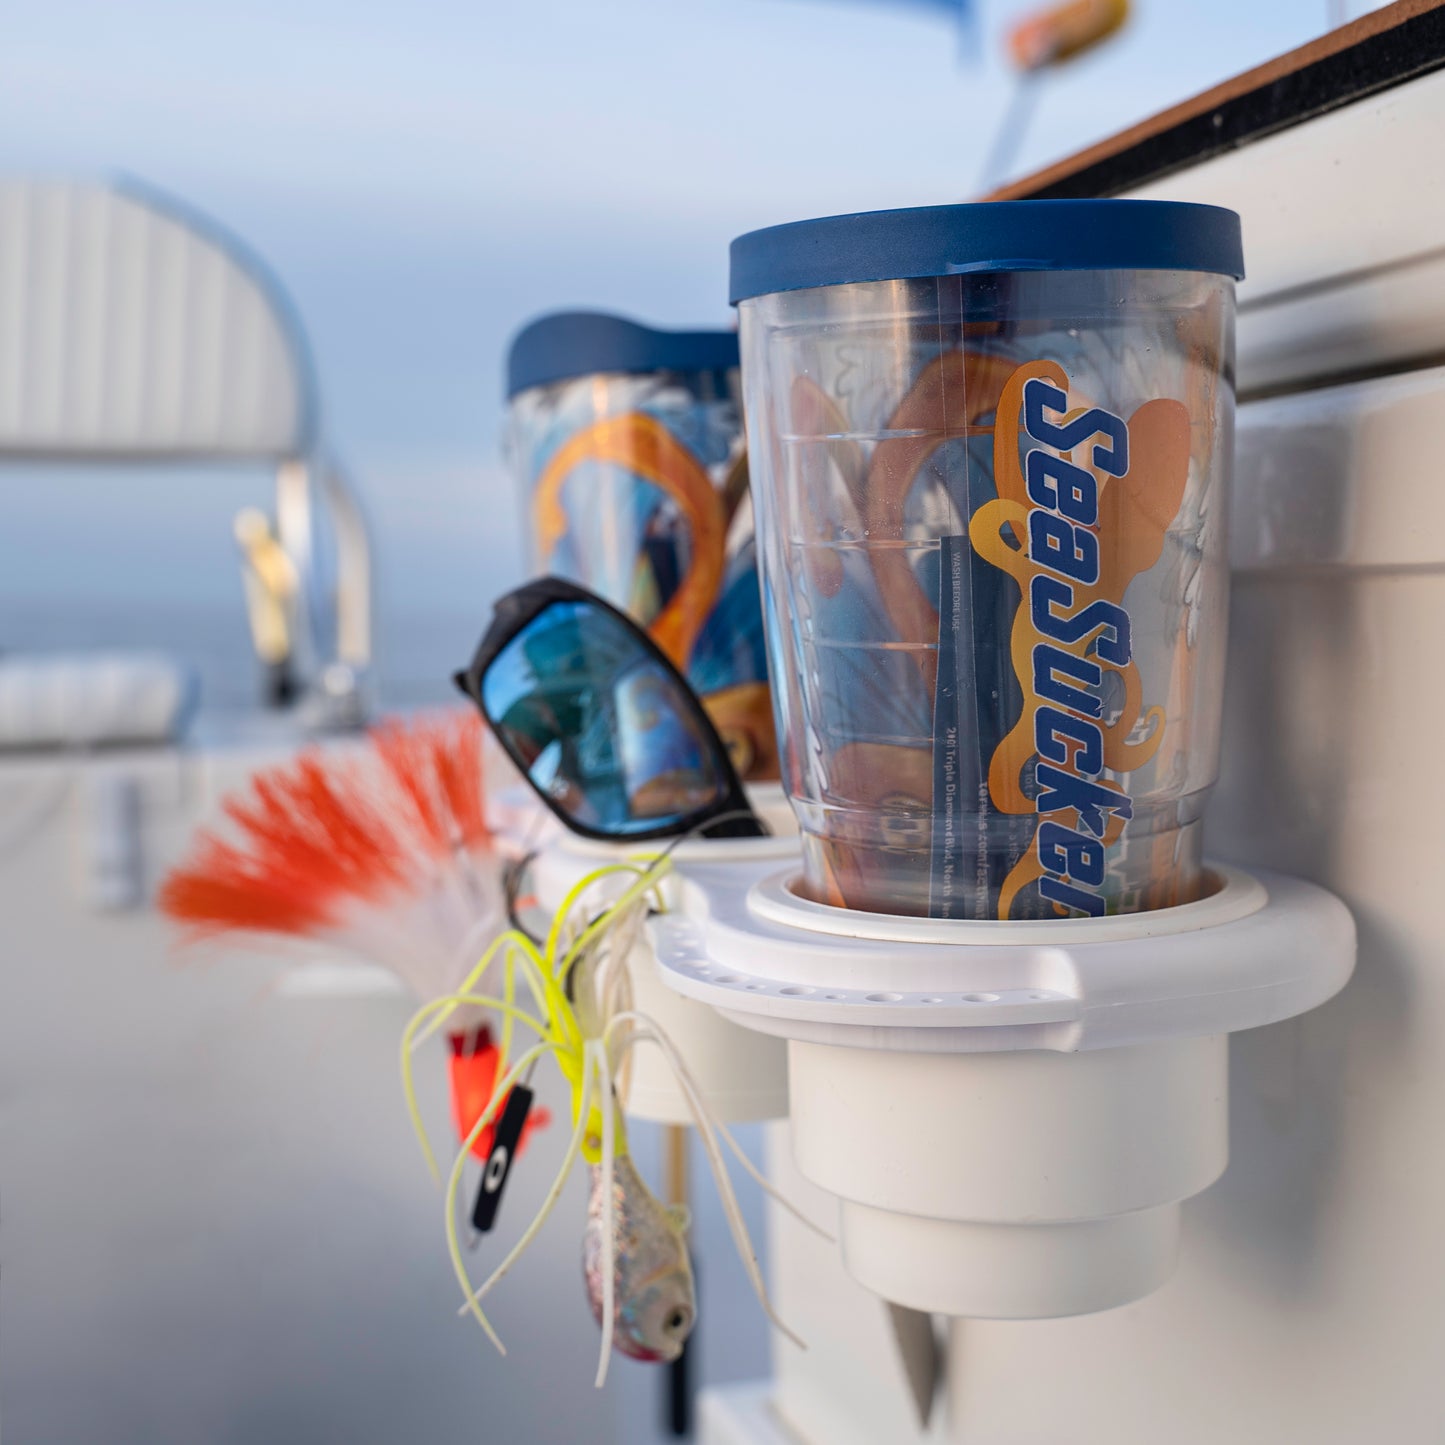 Docktail Jr Boat Cup Holder and Marine Bar Caddy with SeaSucker Mounts